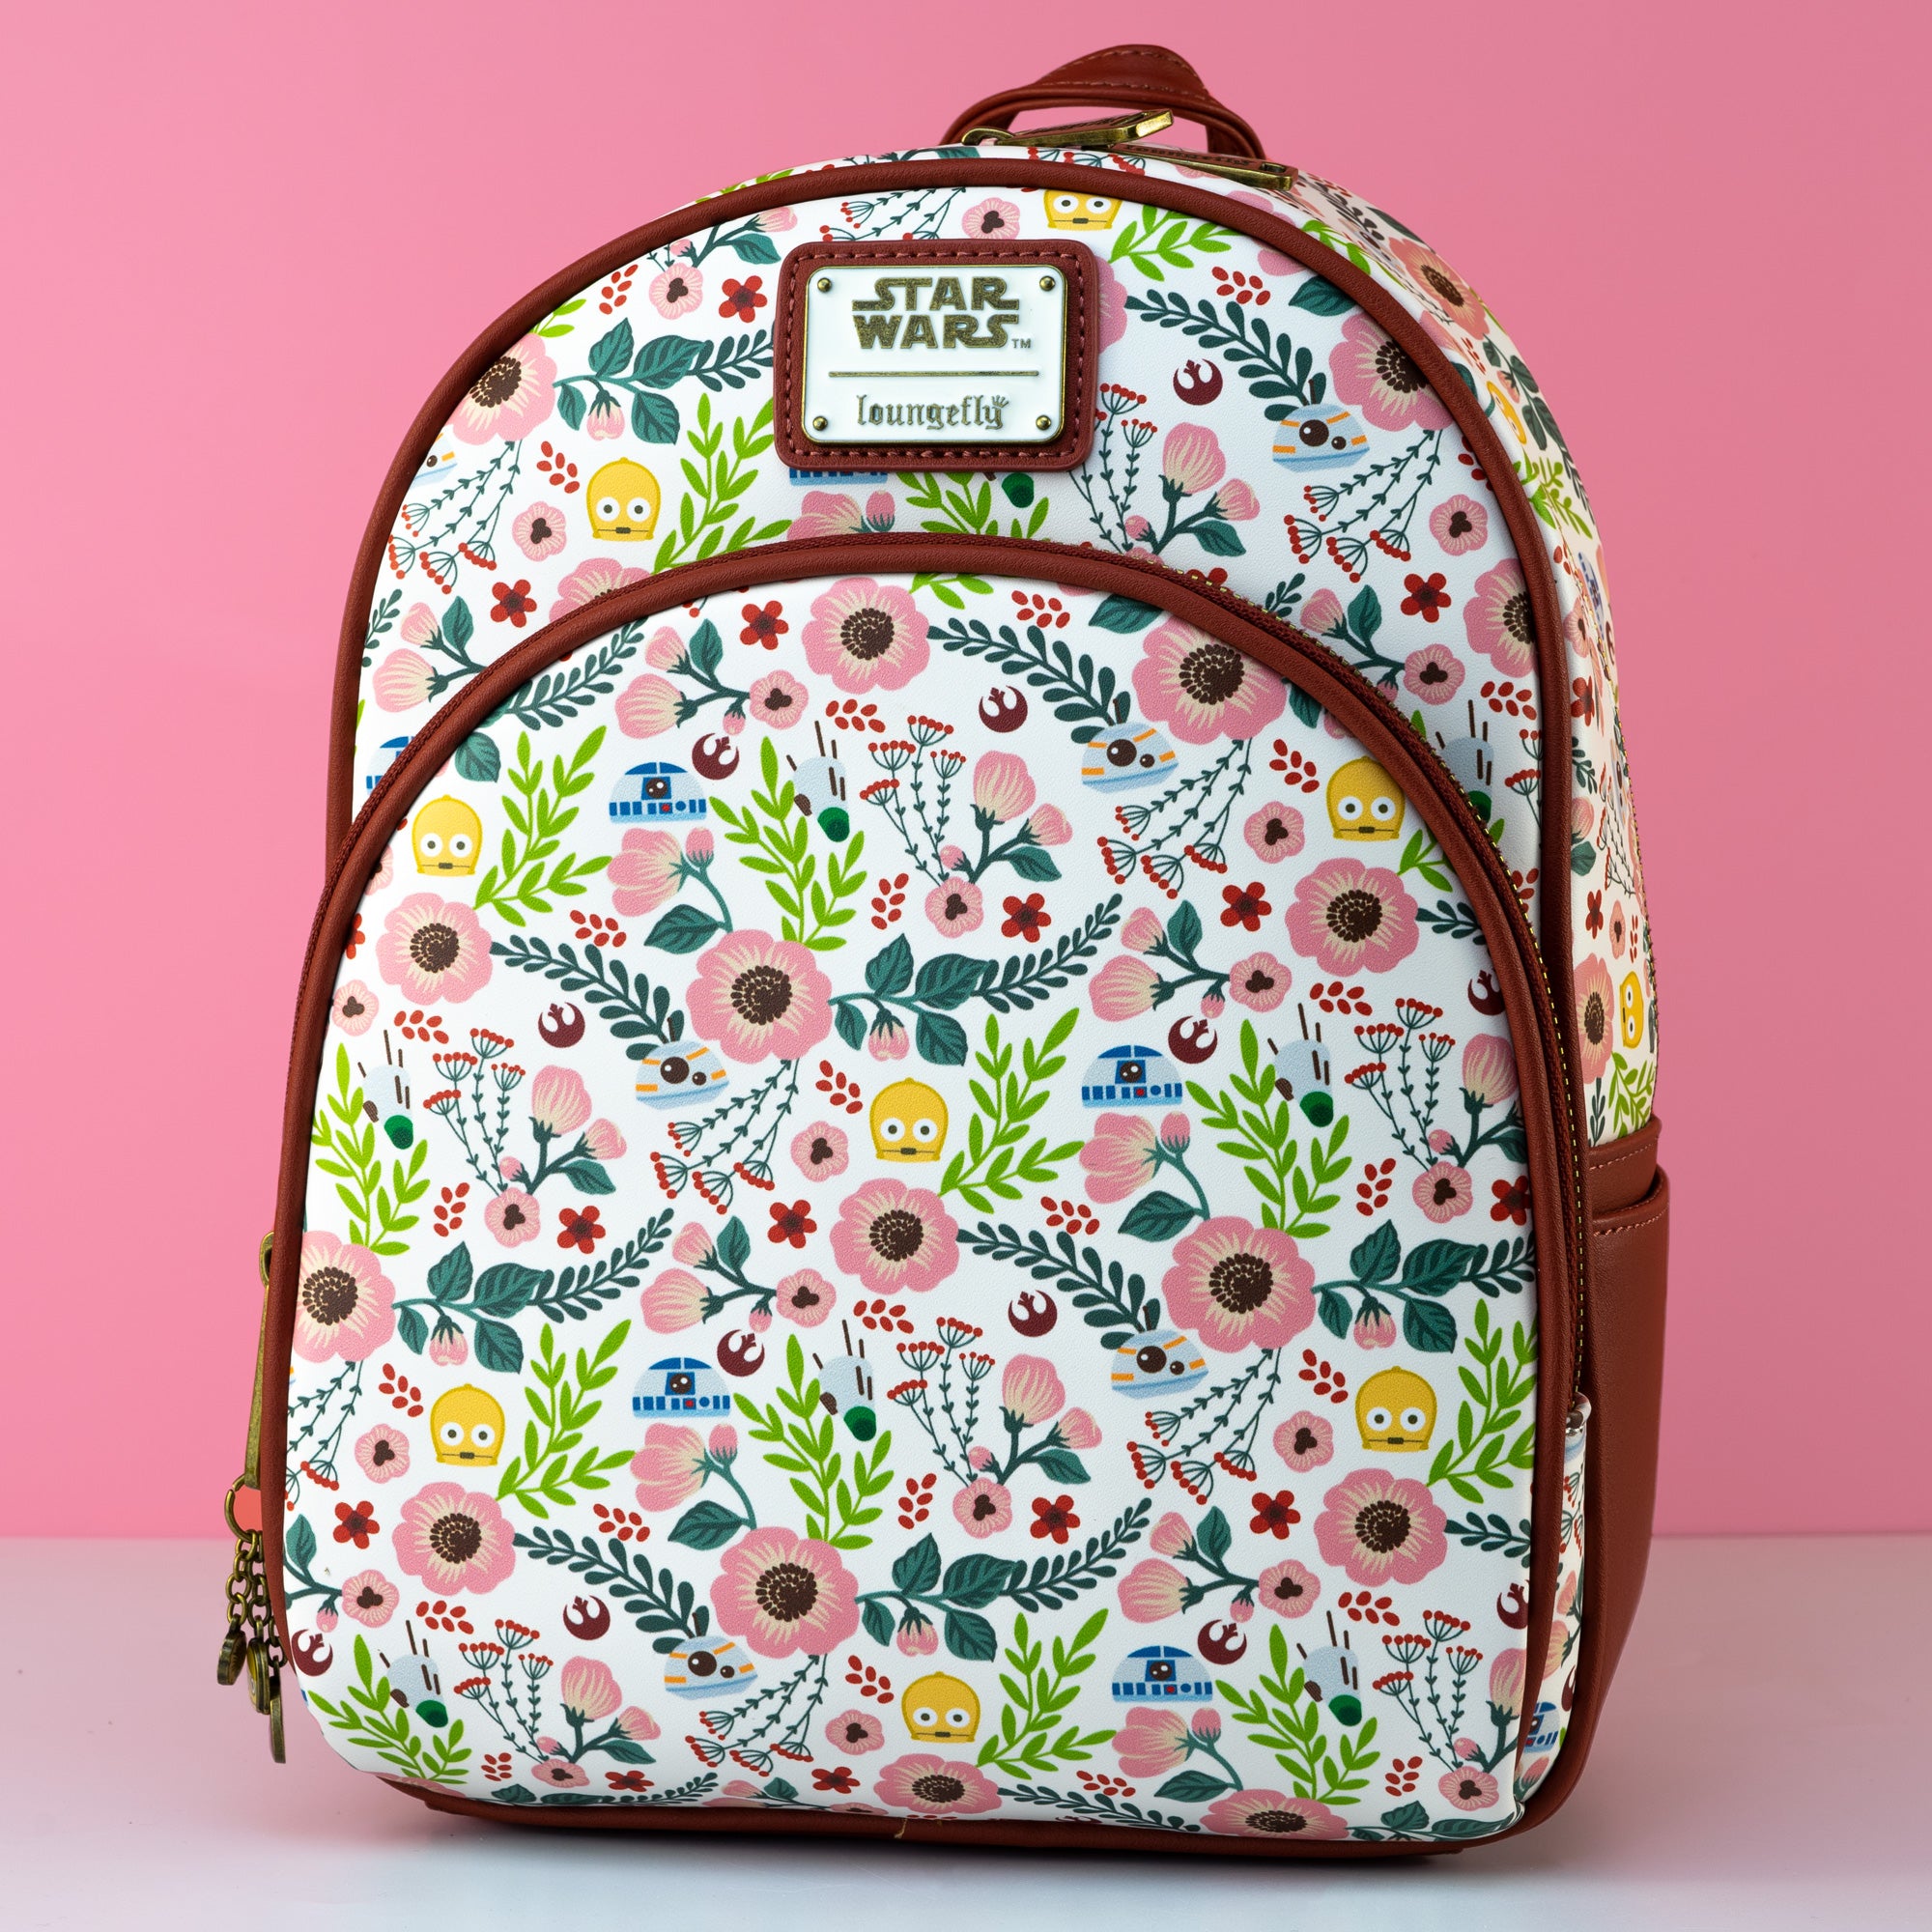 Loungefly x Star Wars Rebel Droids Floral Print Mini Backpack